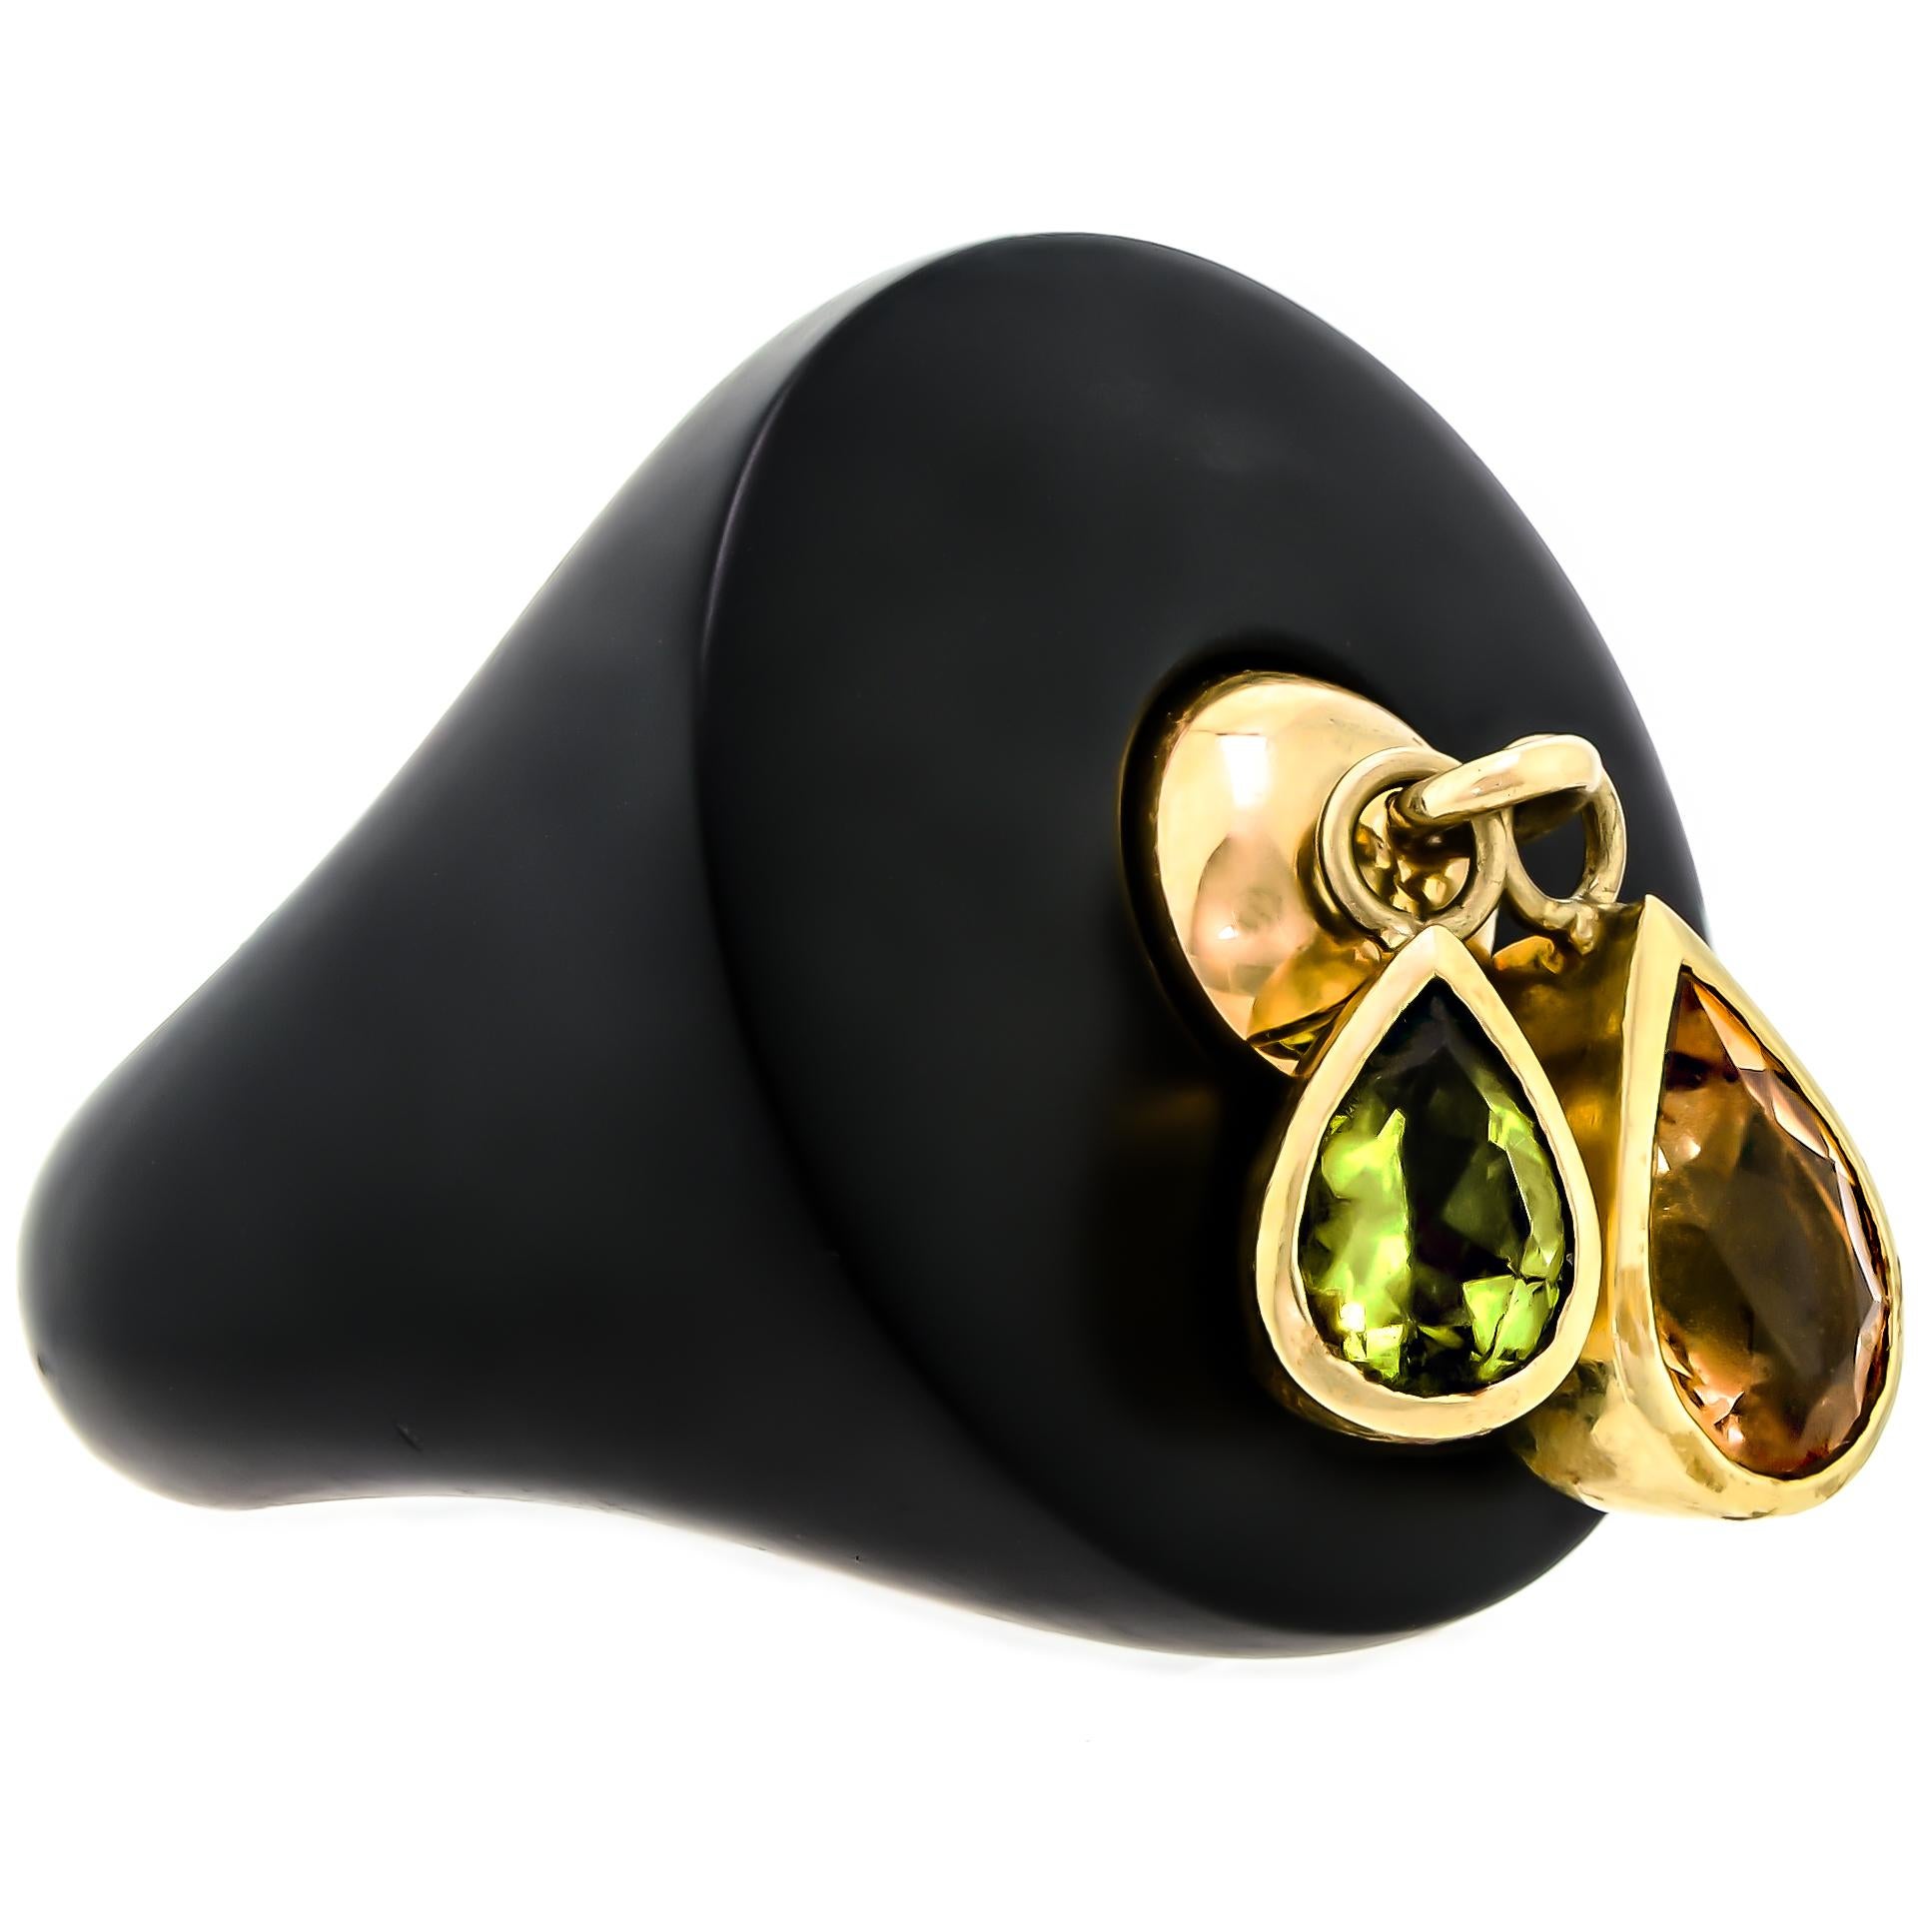 This exquisite cocktail ring is an absolute marvel of craftsmanship. The black resin dome at the center of the ring is a breathtaking sight to behold. The circular dome is adorned with two dazzling pear-shaped gems, one peridot, and one citrine,